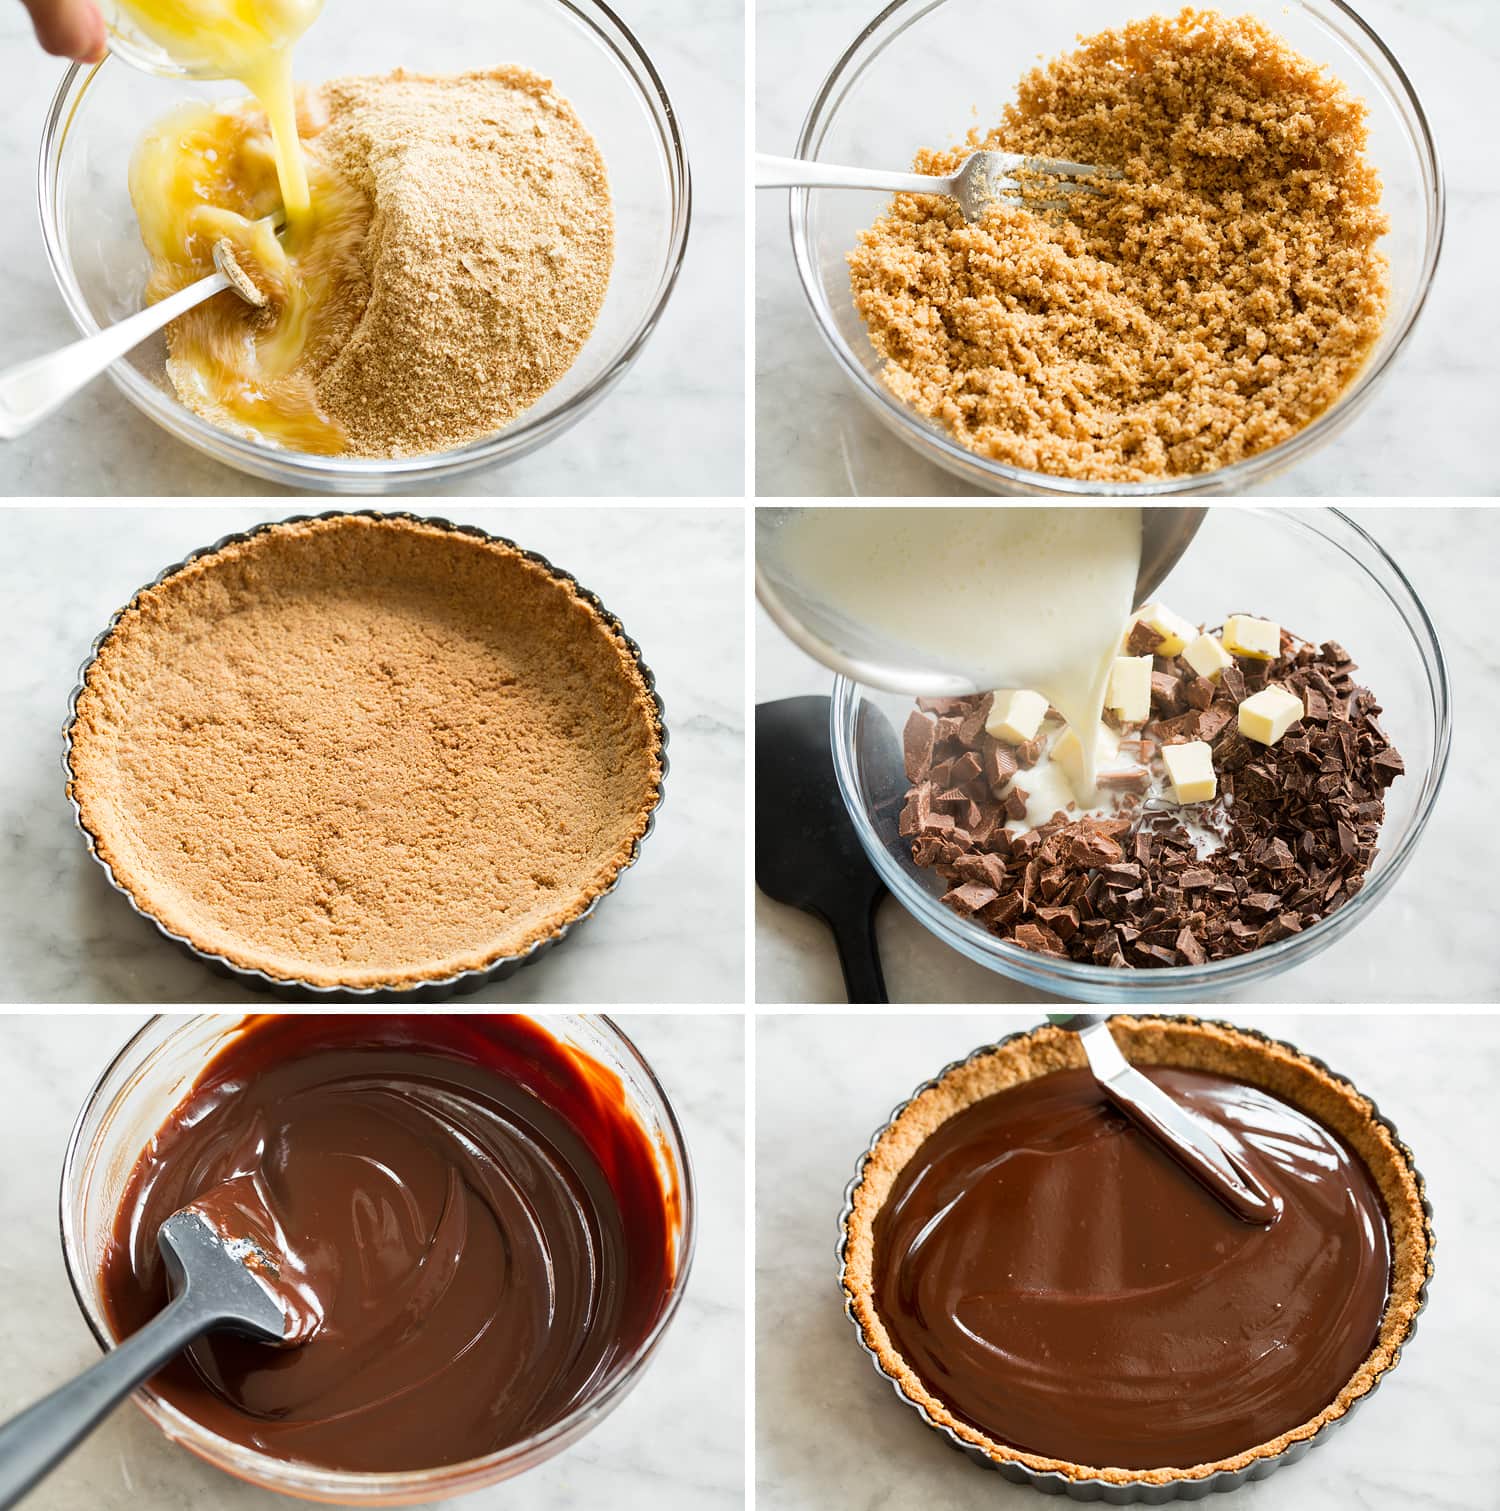 Steps of making graham cracker crust and chocolate filling for pie.